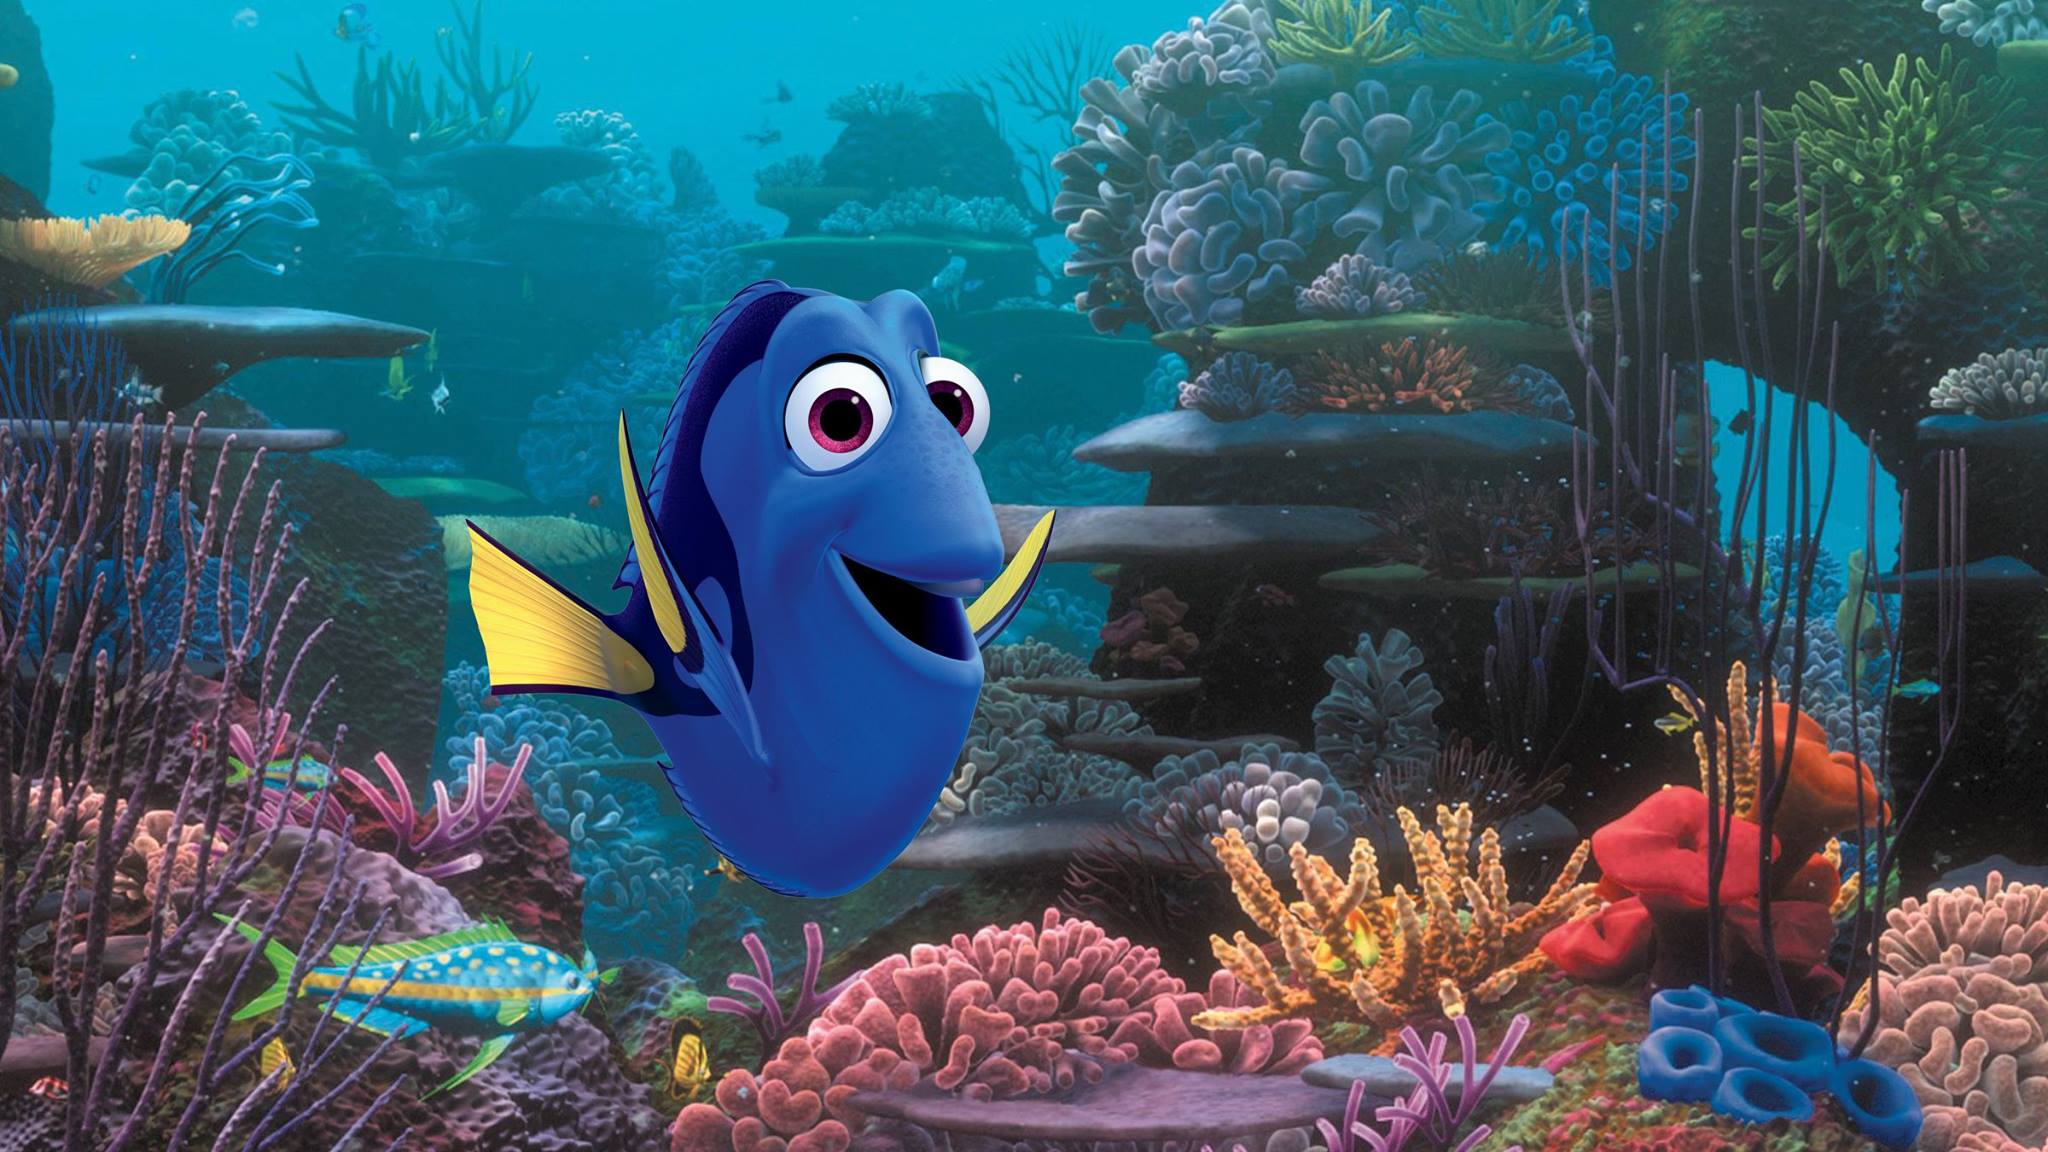 eiff-2016-finding-dory-slash-irreplaceable-bigger-than-the-shining-reviews